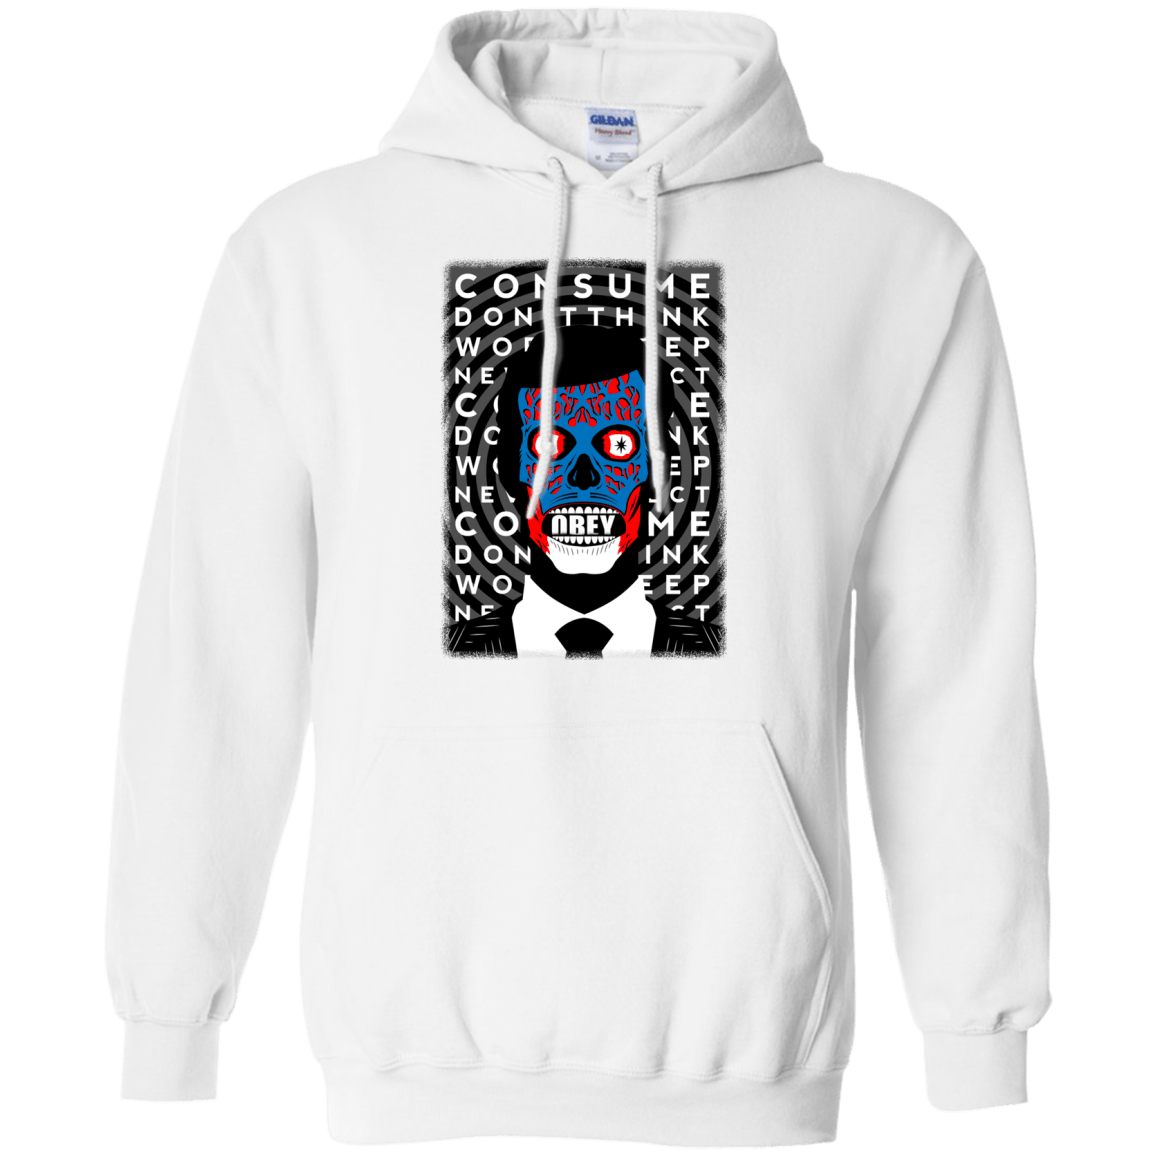 Sweatshirts White / Small OBEY Pullover Hoodie